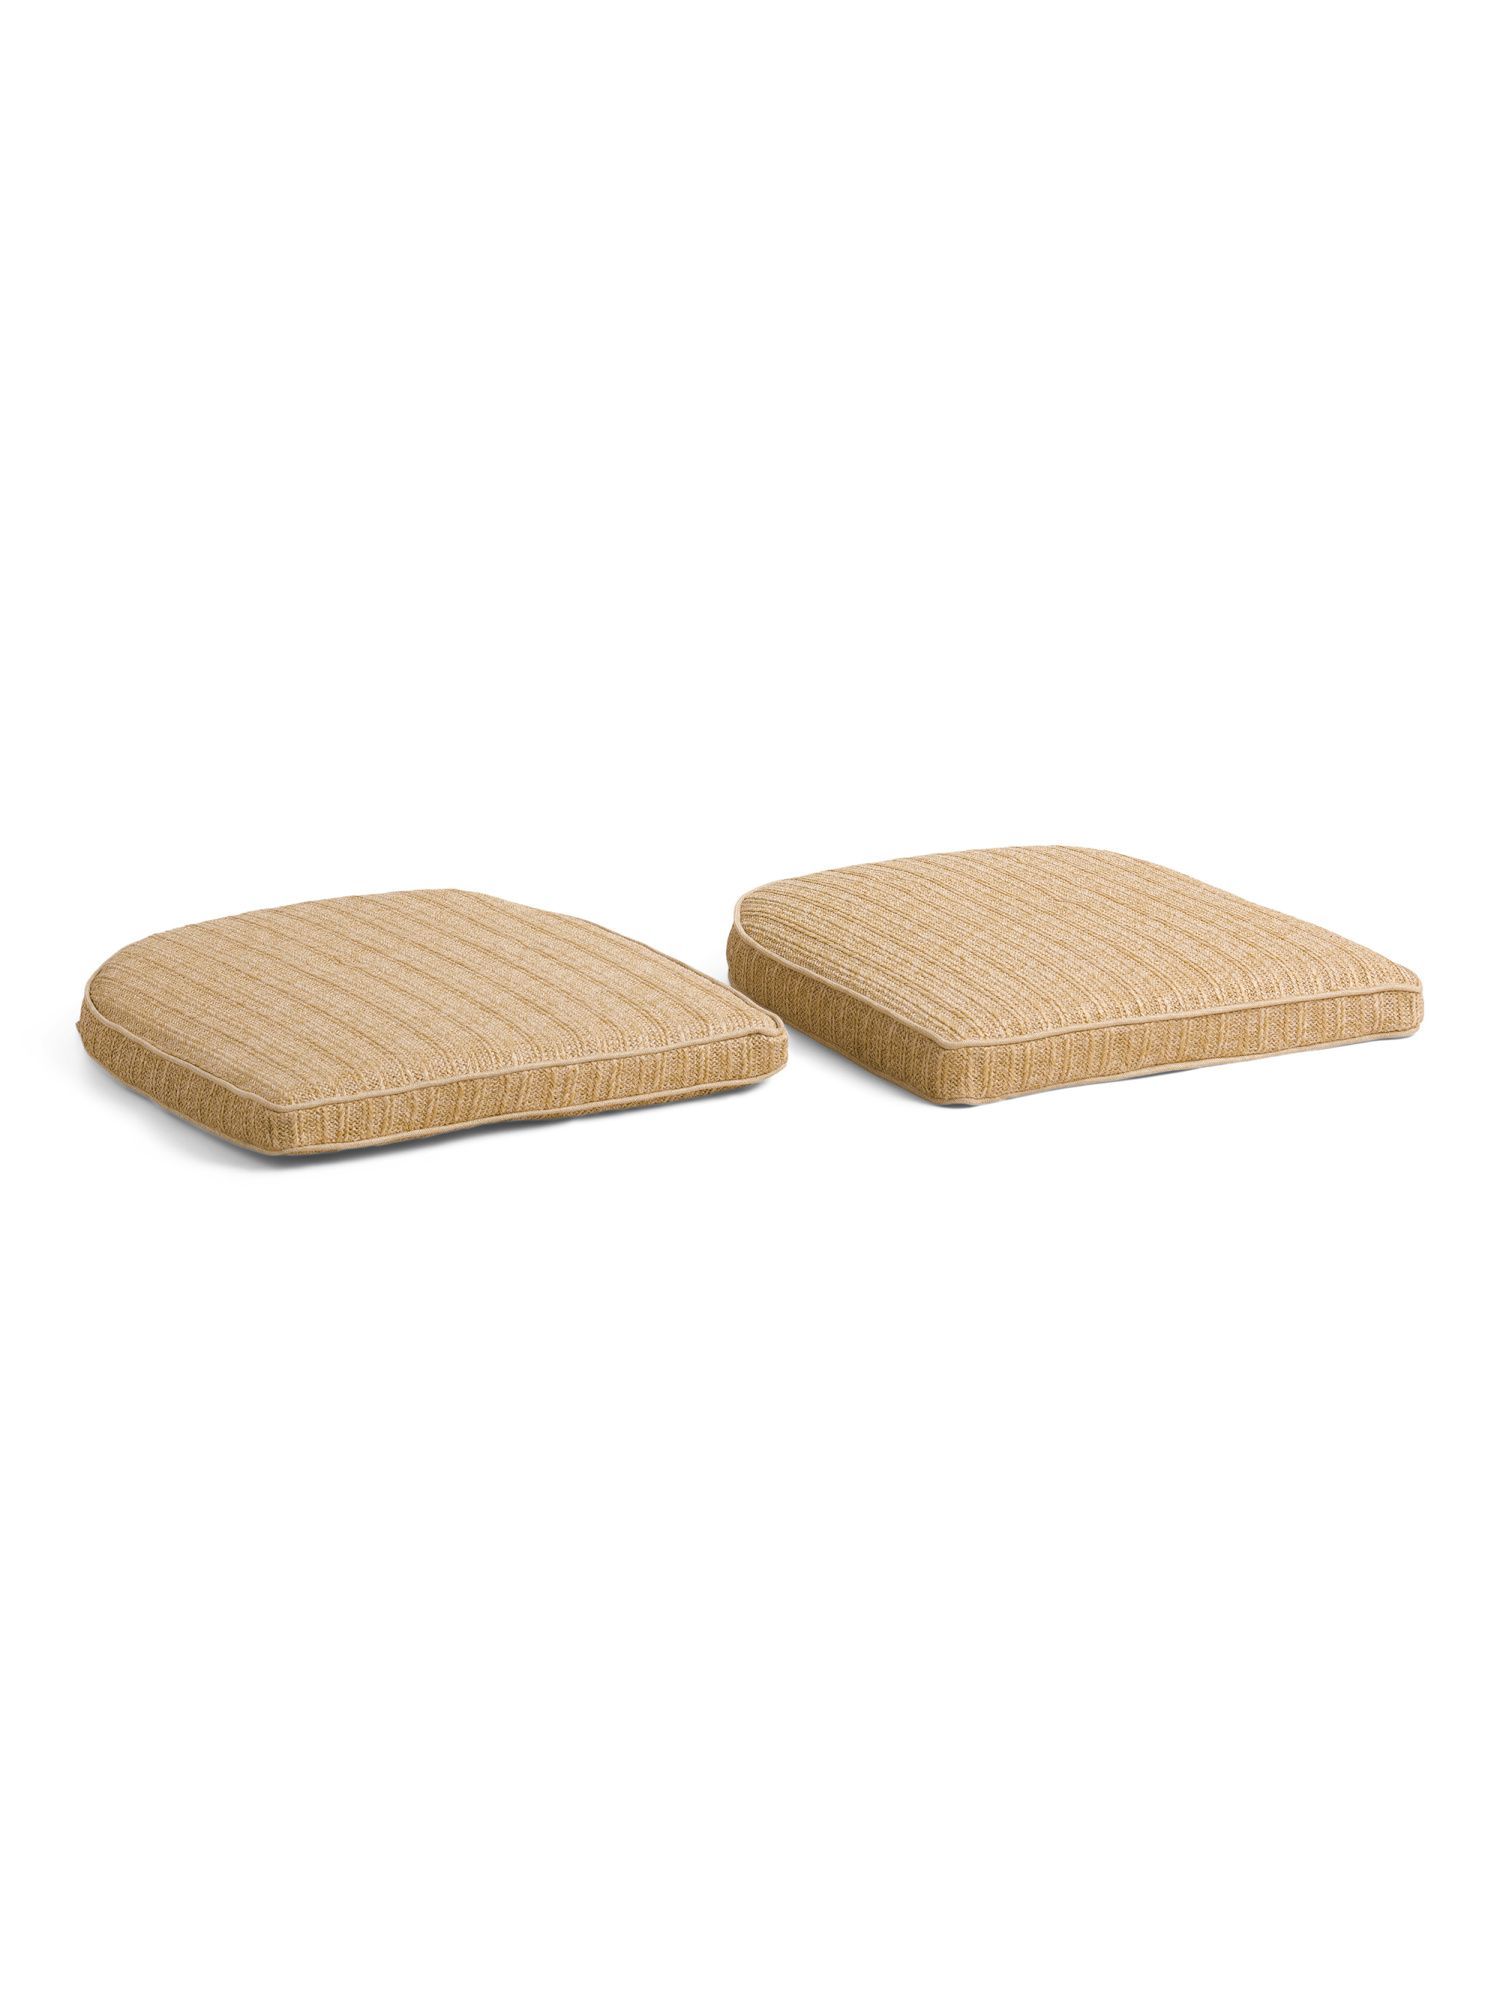 20x20 2pc Set Outdoor Woven Gusset Square Chair Pads | TJ Maxx